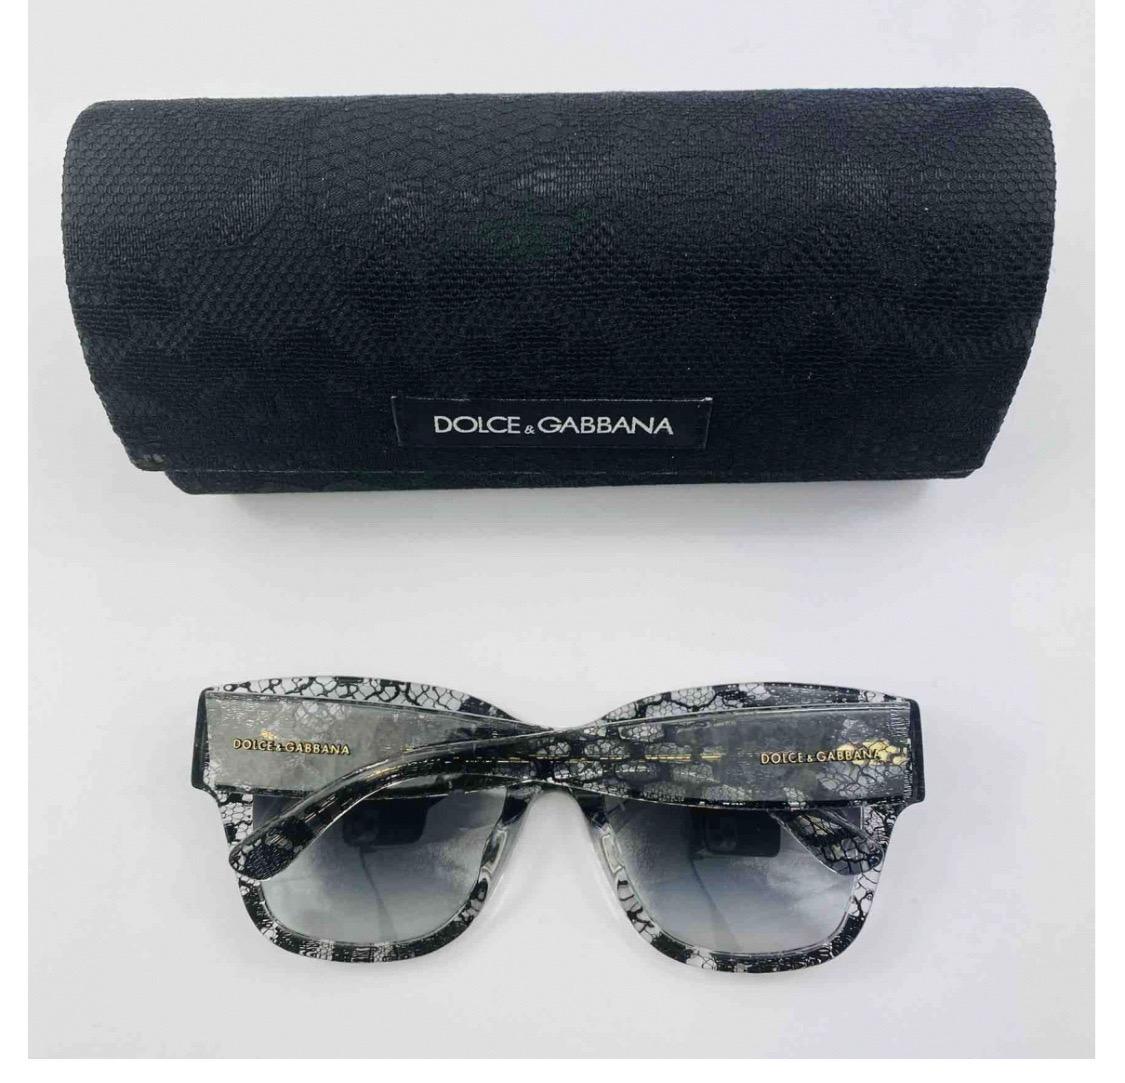 Dolce & Gabbana Plastic Black Sicily
Taormina Lace printed sunglasses
Gradient lenses.

Logo details

Made in Italy.

Brand new with the box and case.
Please check my other DG sunglasses
as well as beautiful beachwear &
beach accessory collections! 
